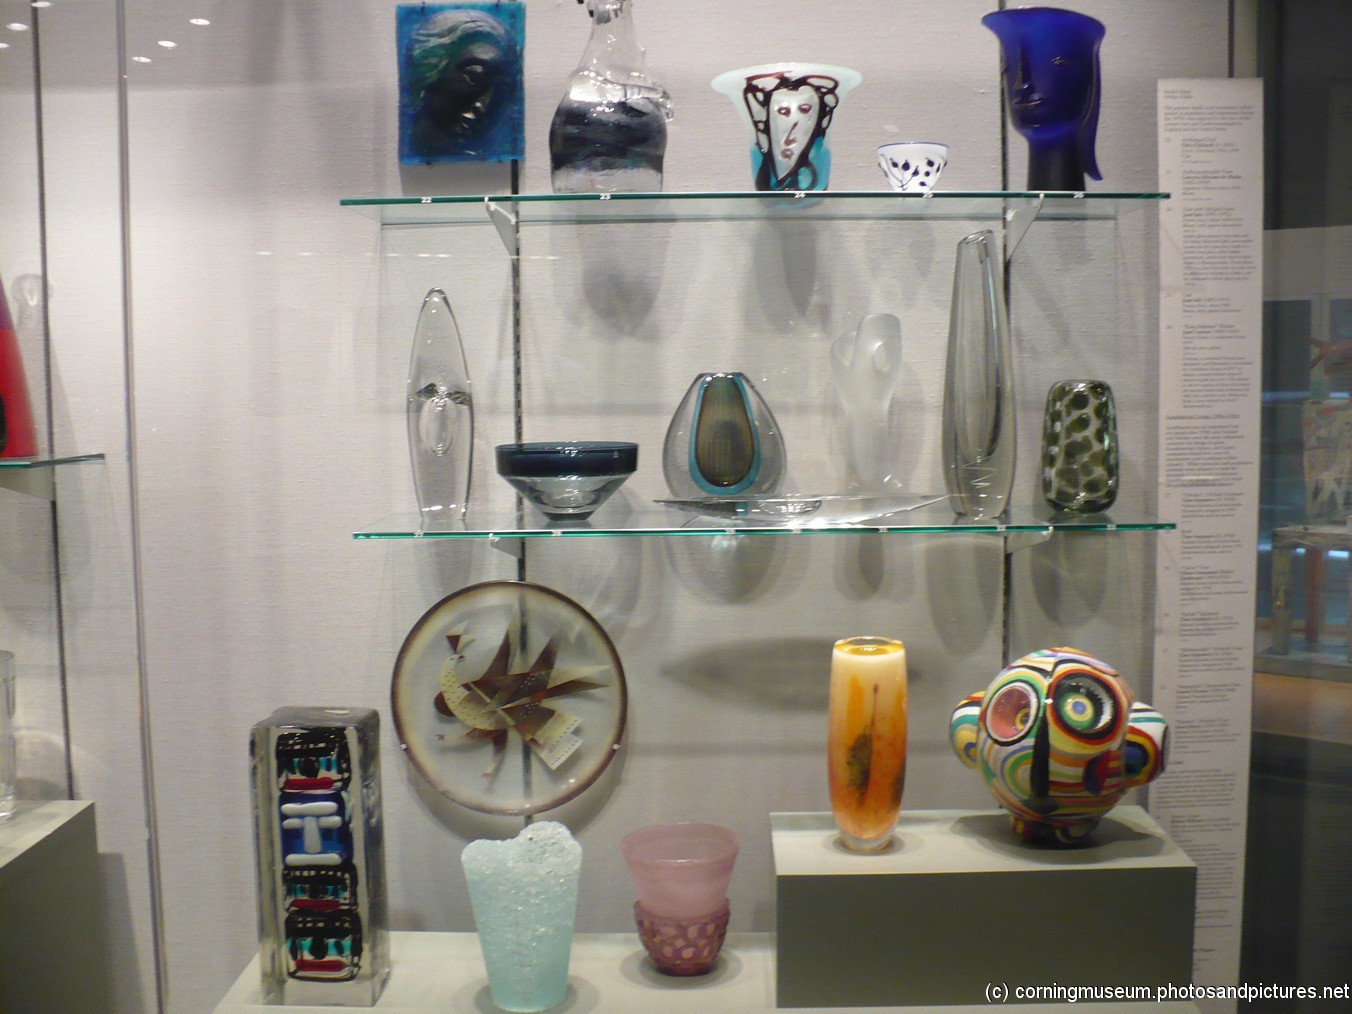 Collection of contemporary glass art at Corning Museum of Glass.jpg
